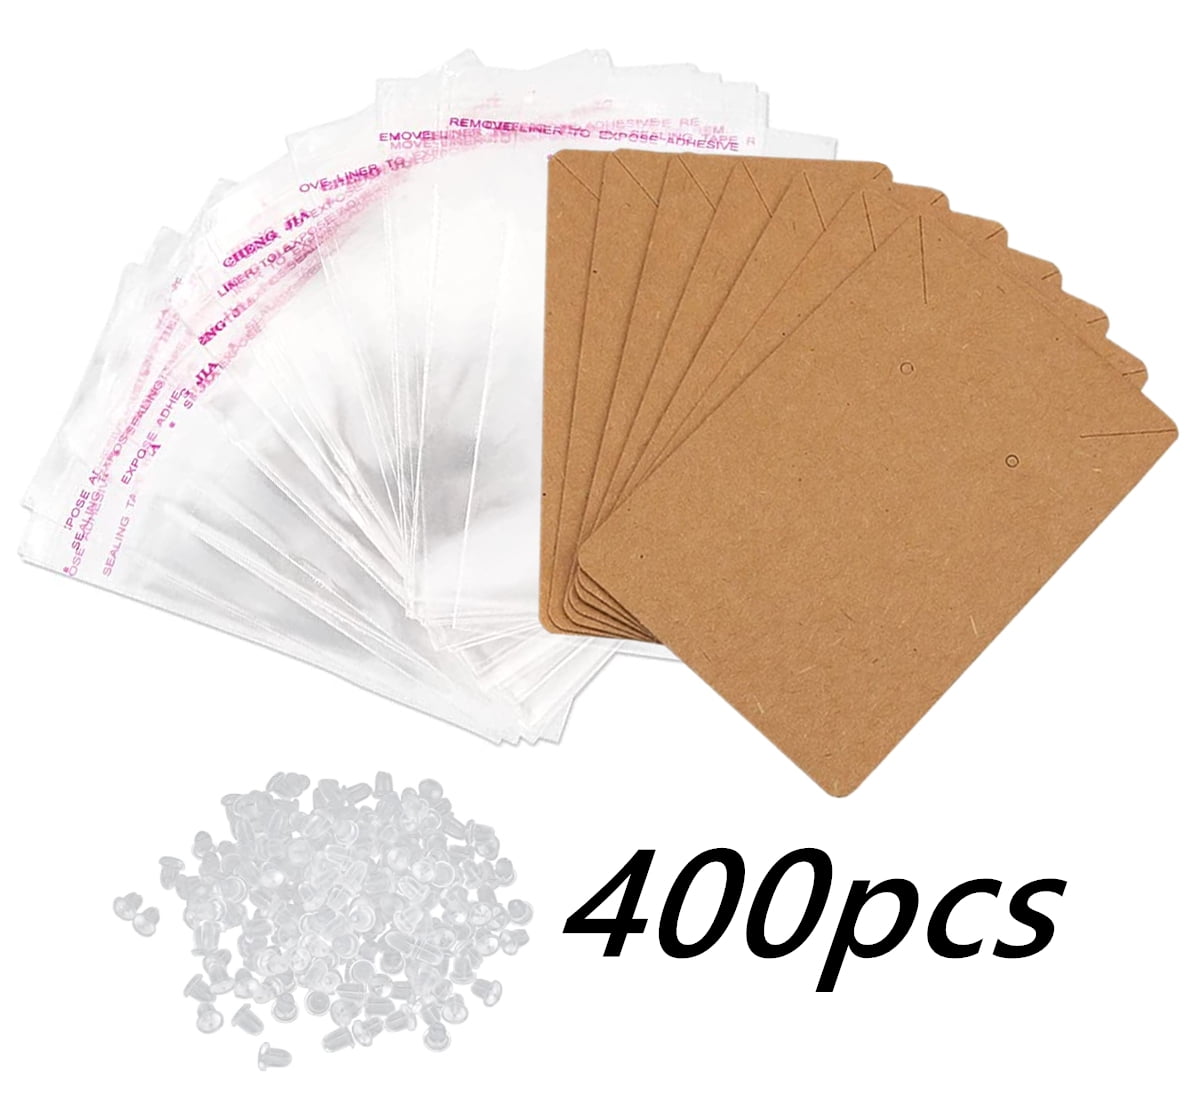 300pcs Standing Earring Display Cards Earring Cards for Selling Earring  Holder Cards Earring Packaging for Jewelry Supplies